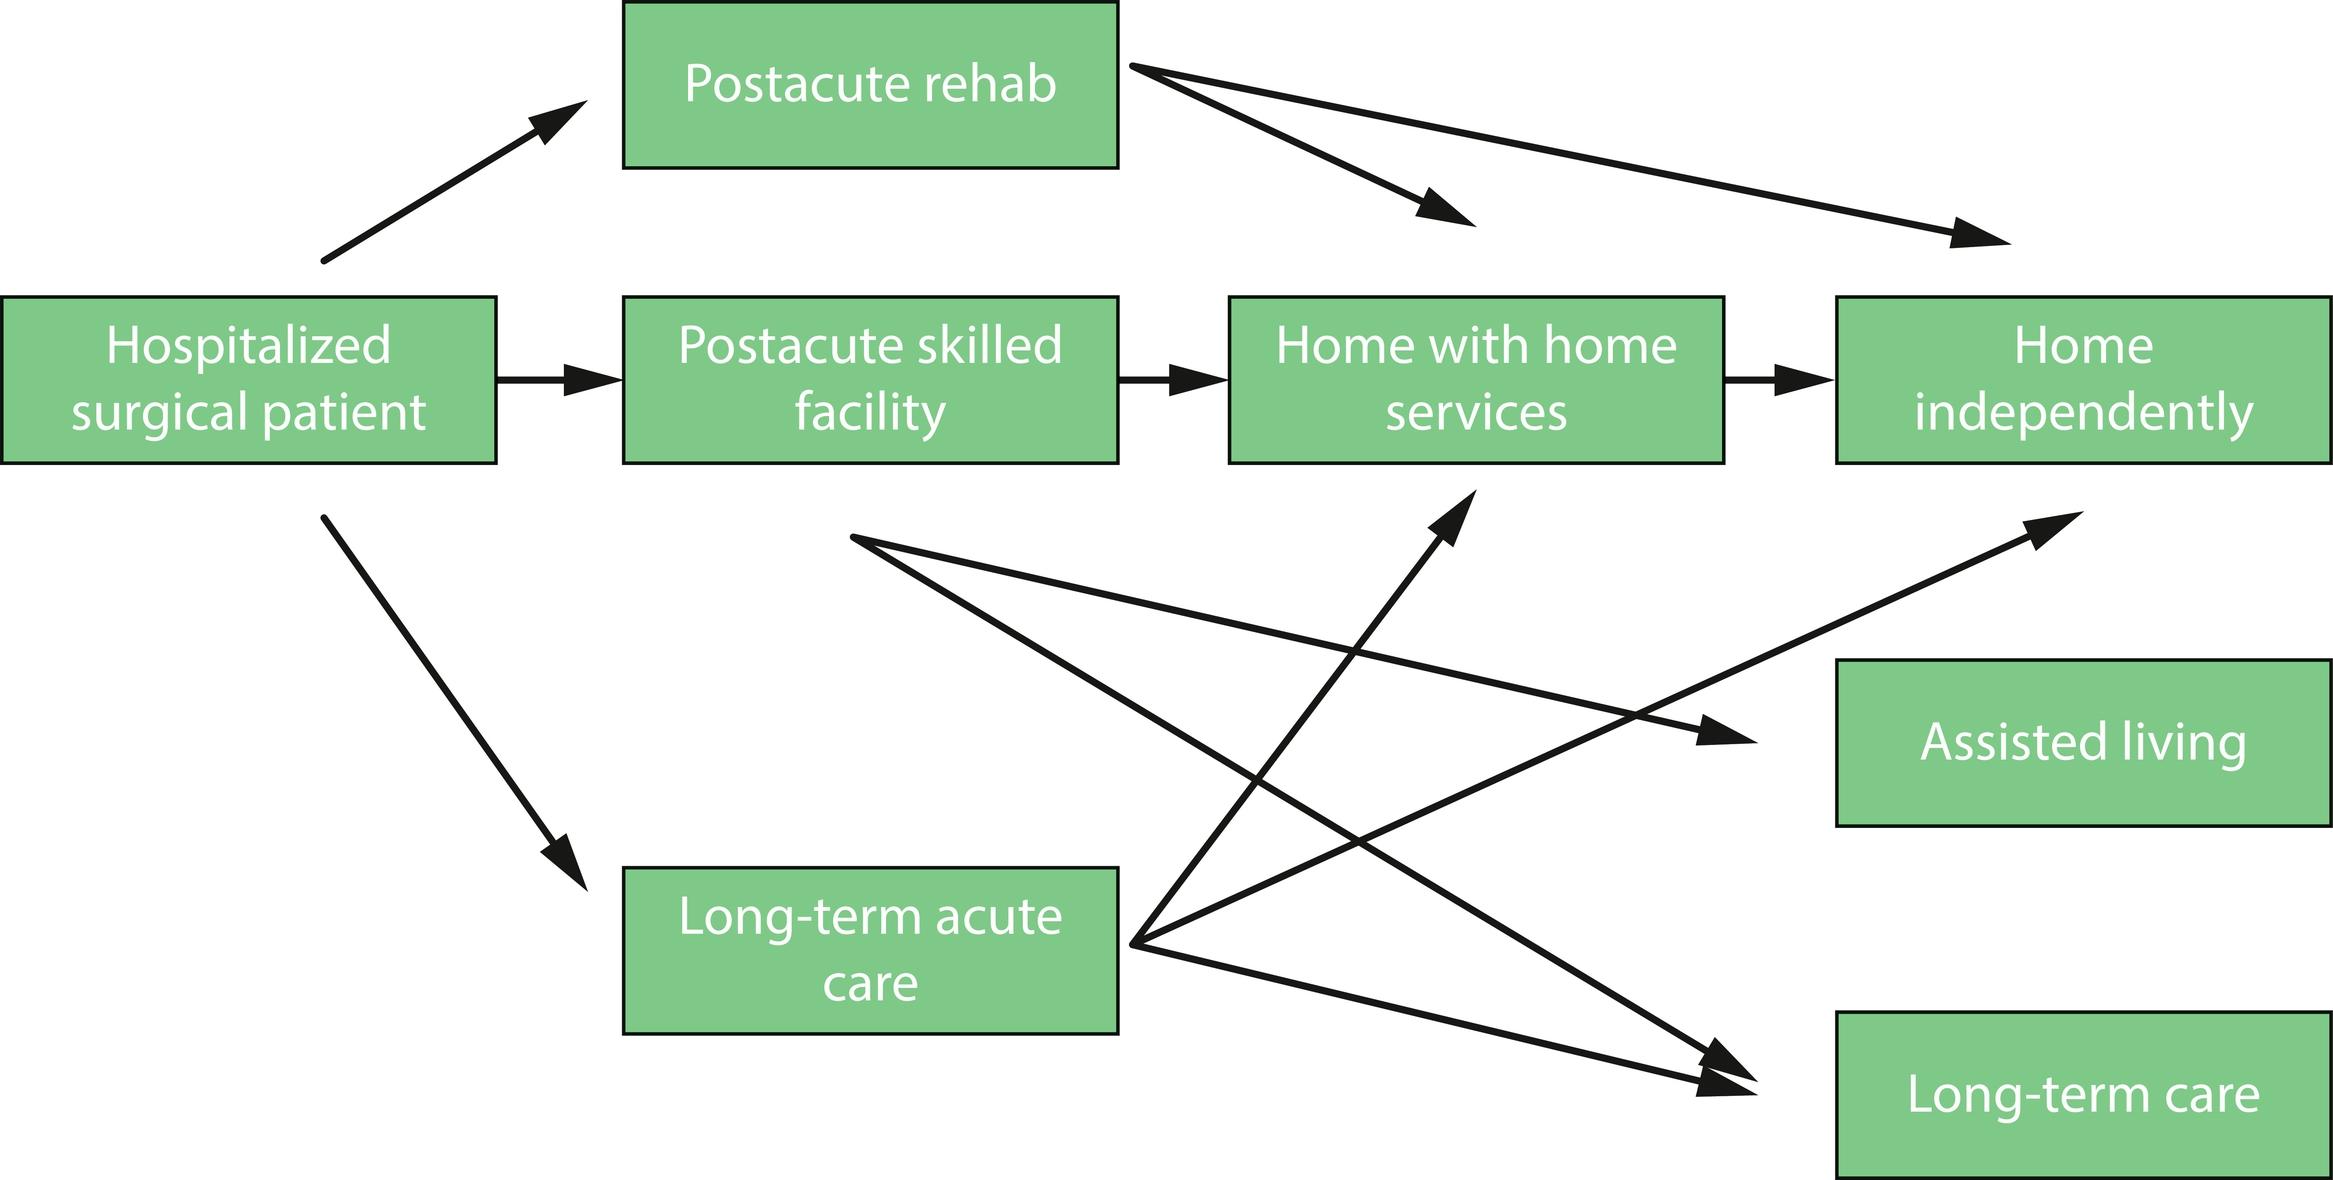 Fig. 47.1, Paths from hospital to home. The path to home postdischarge is not always direct or even linear.